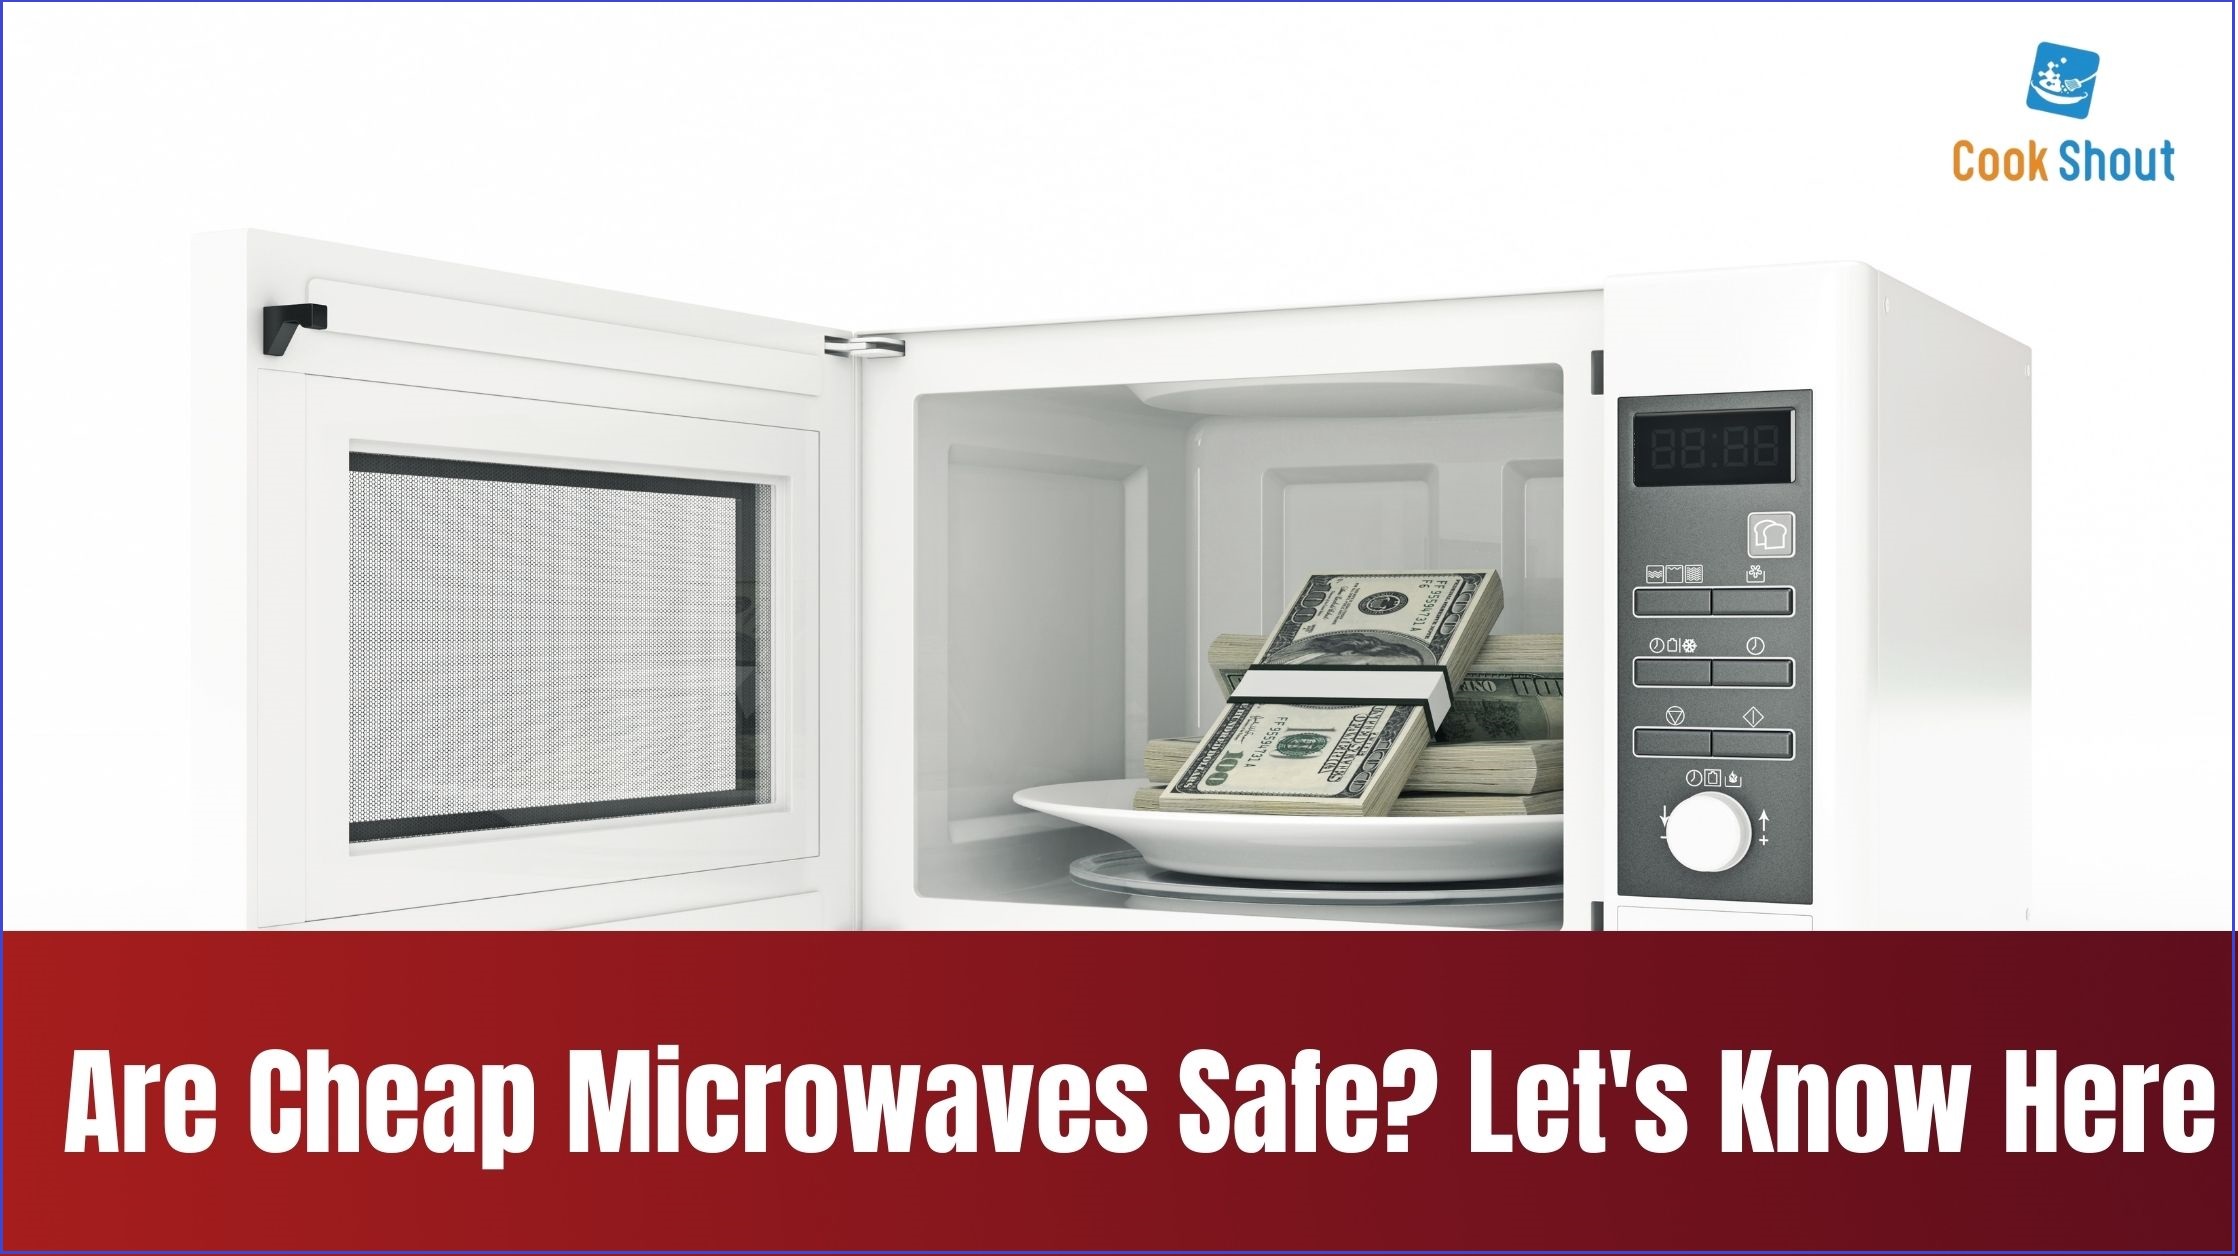 Are Cheap Microwaves Safe?